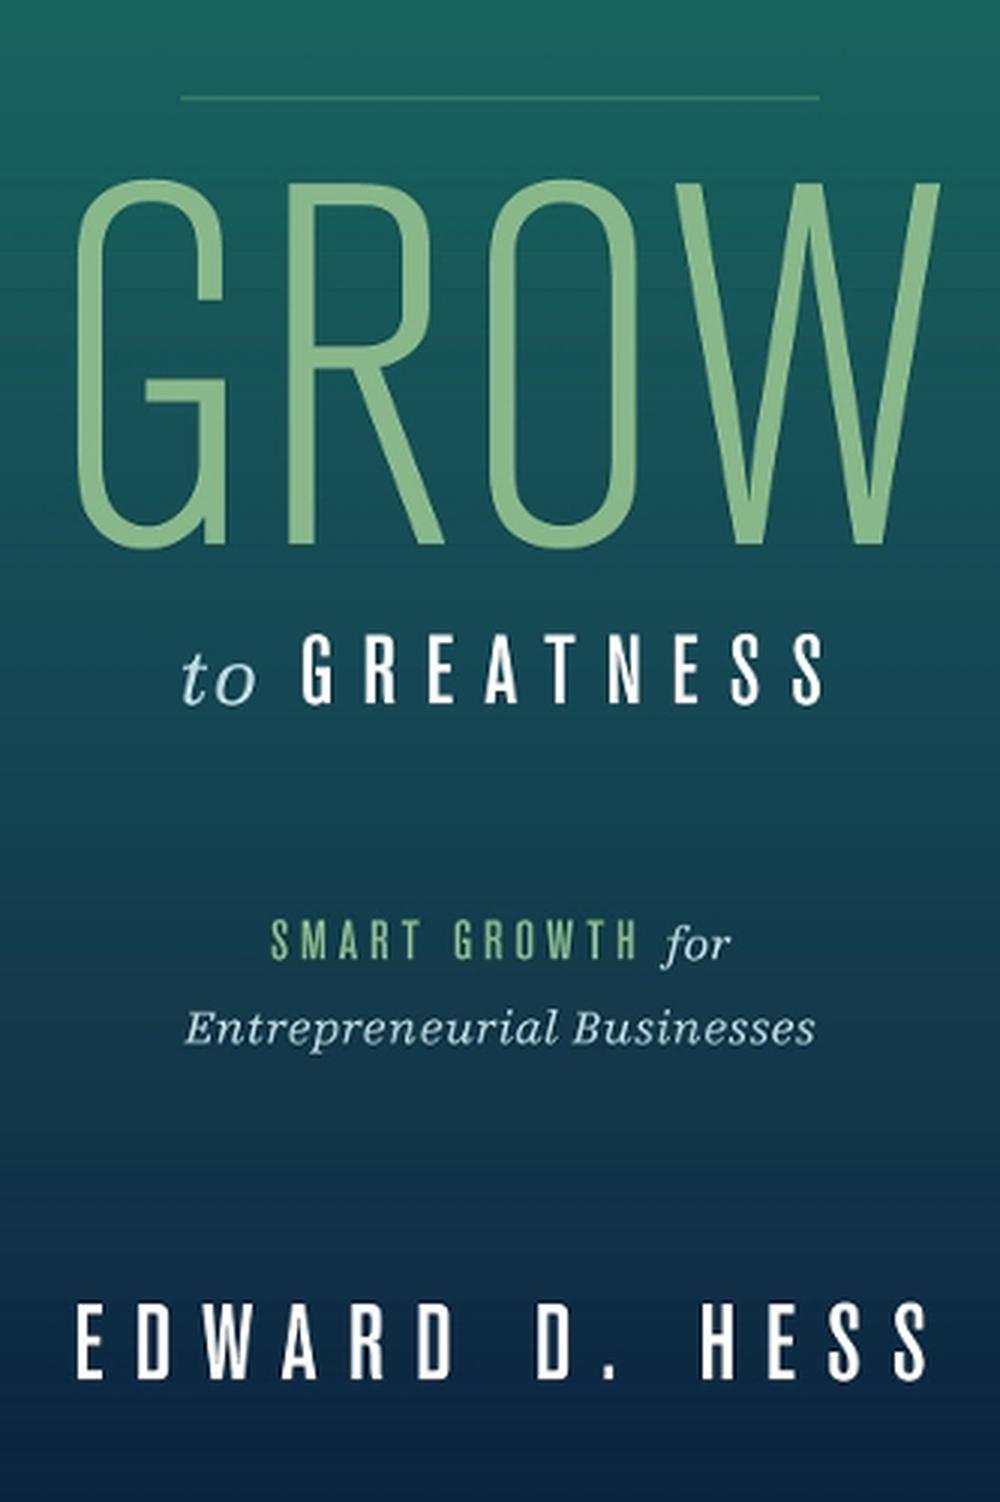 Grow to Greatness Smart Growth for Entrepreneurial Businesses by Edward D. Hess 9780804775342